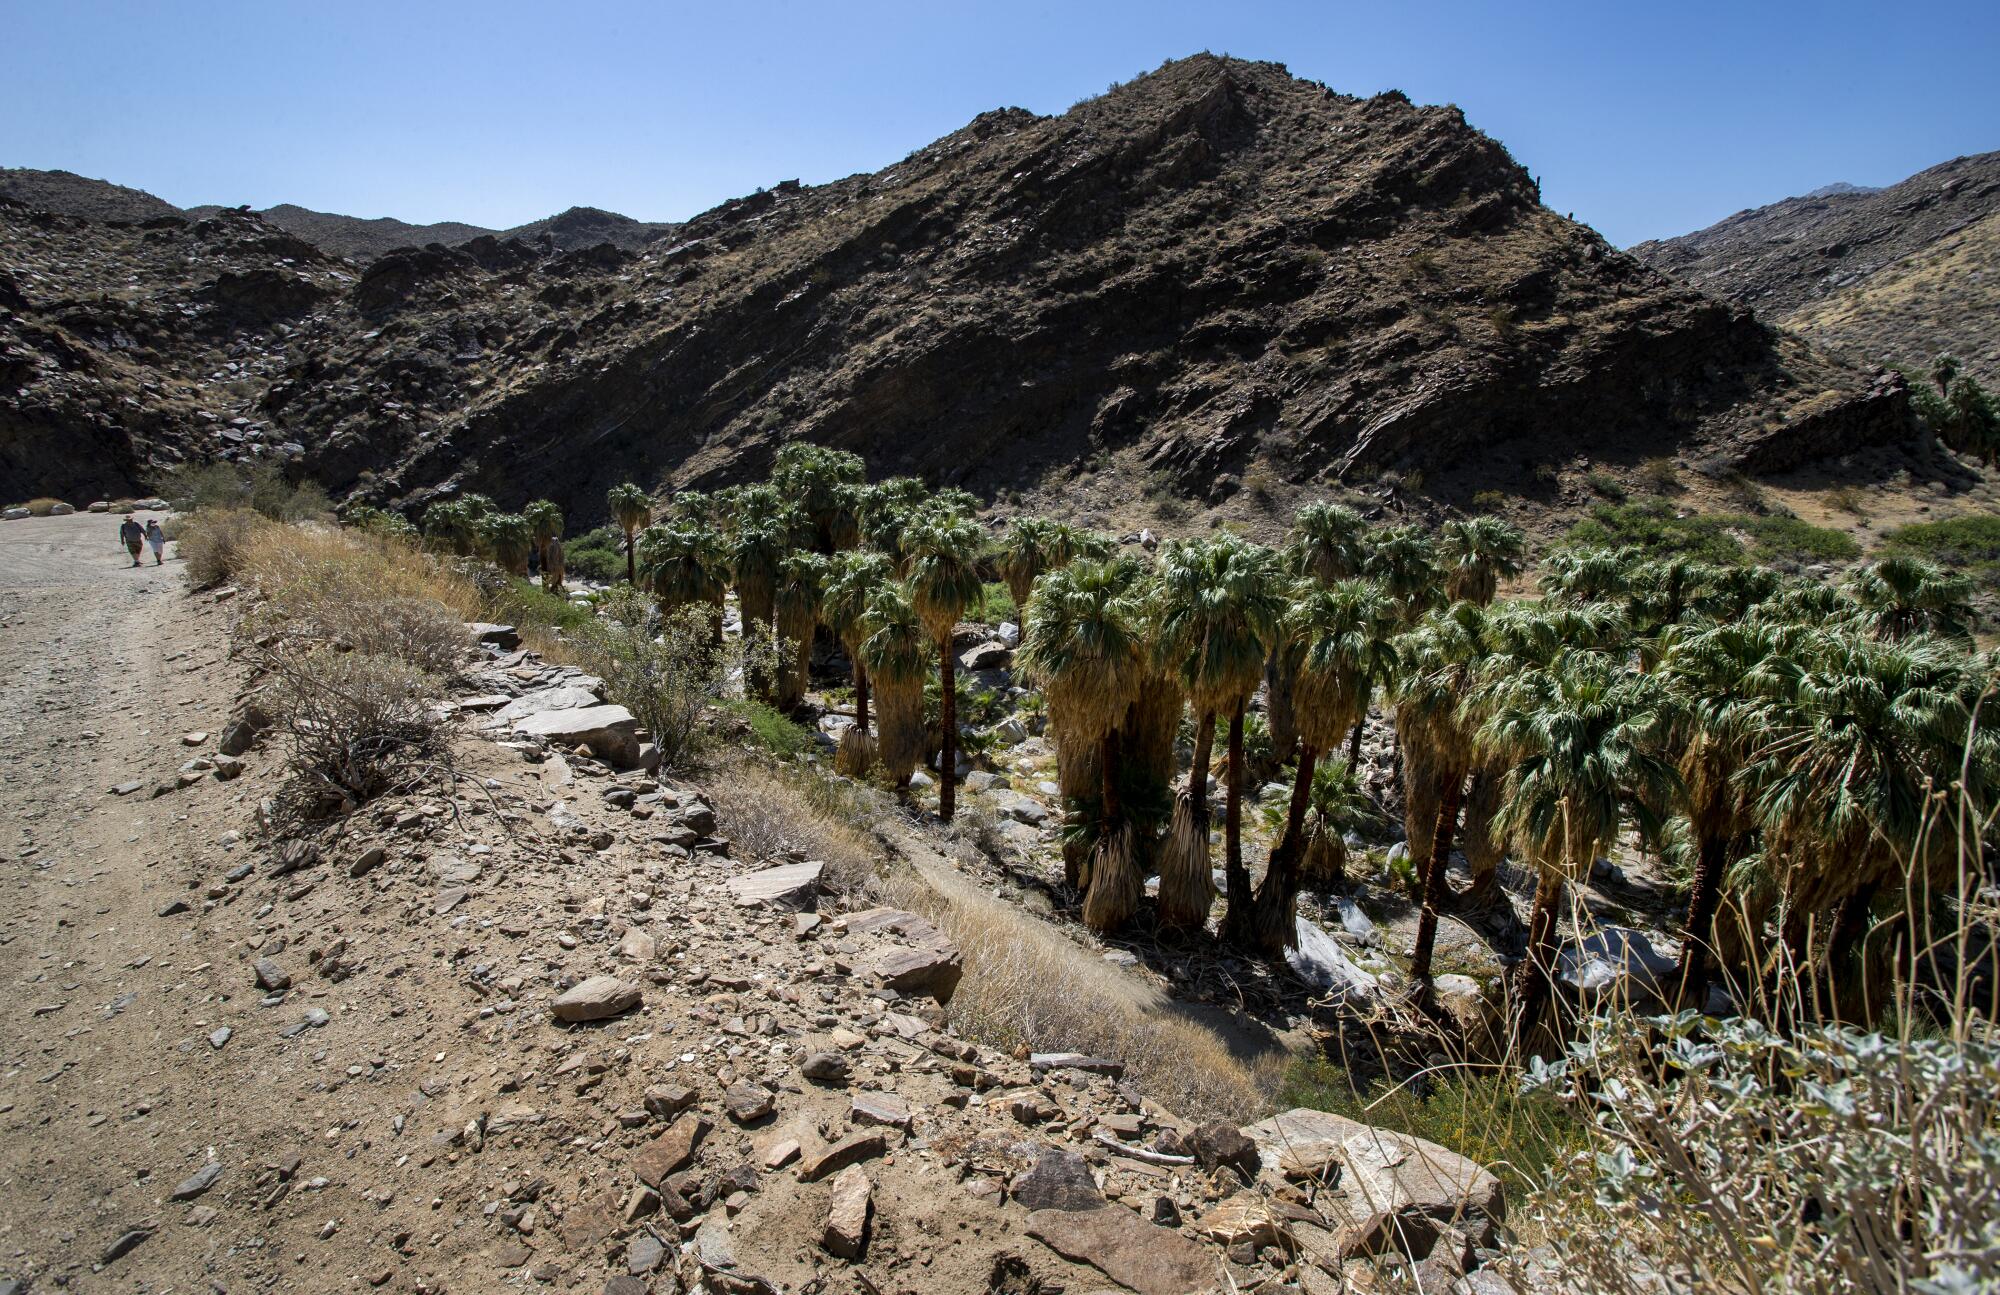 Two hikers pass by palm trees in a desert.